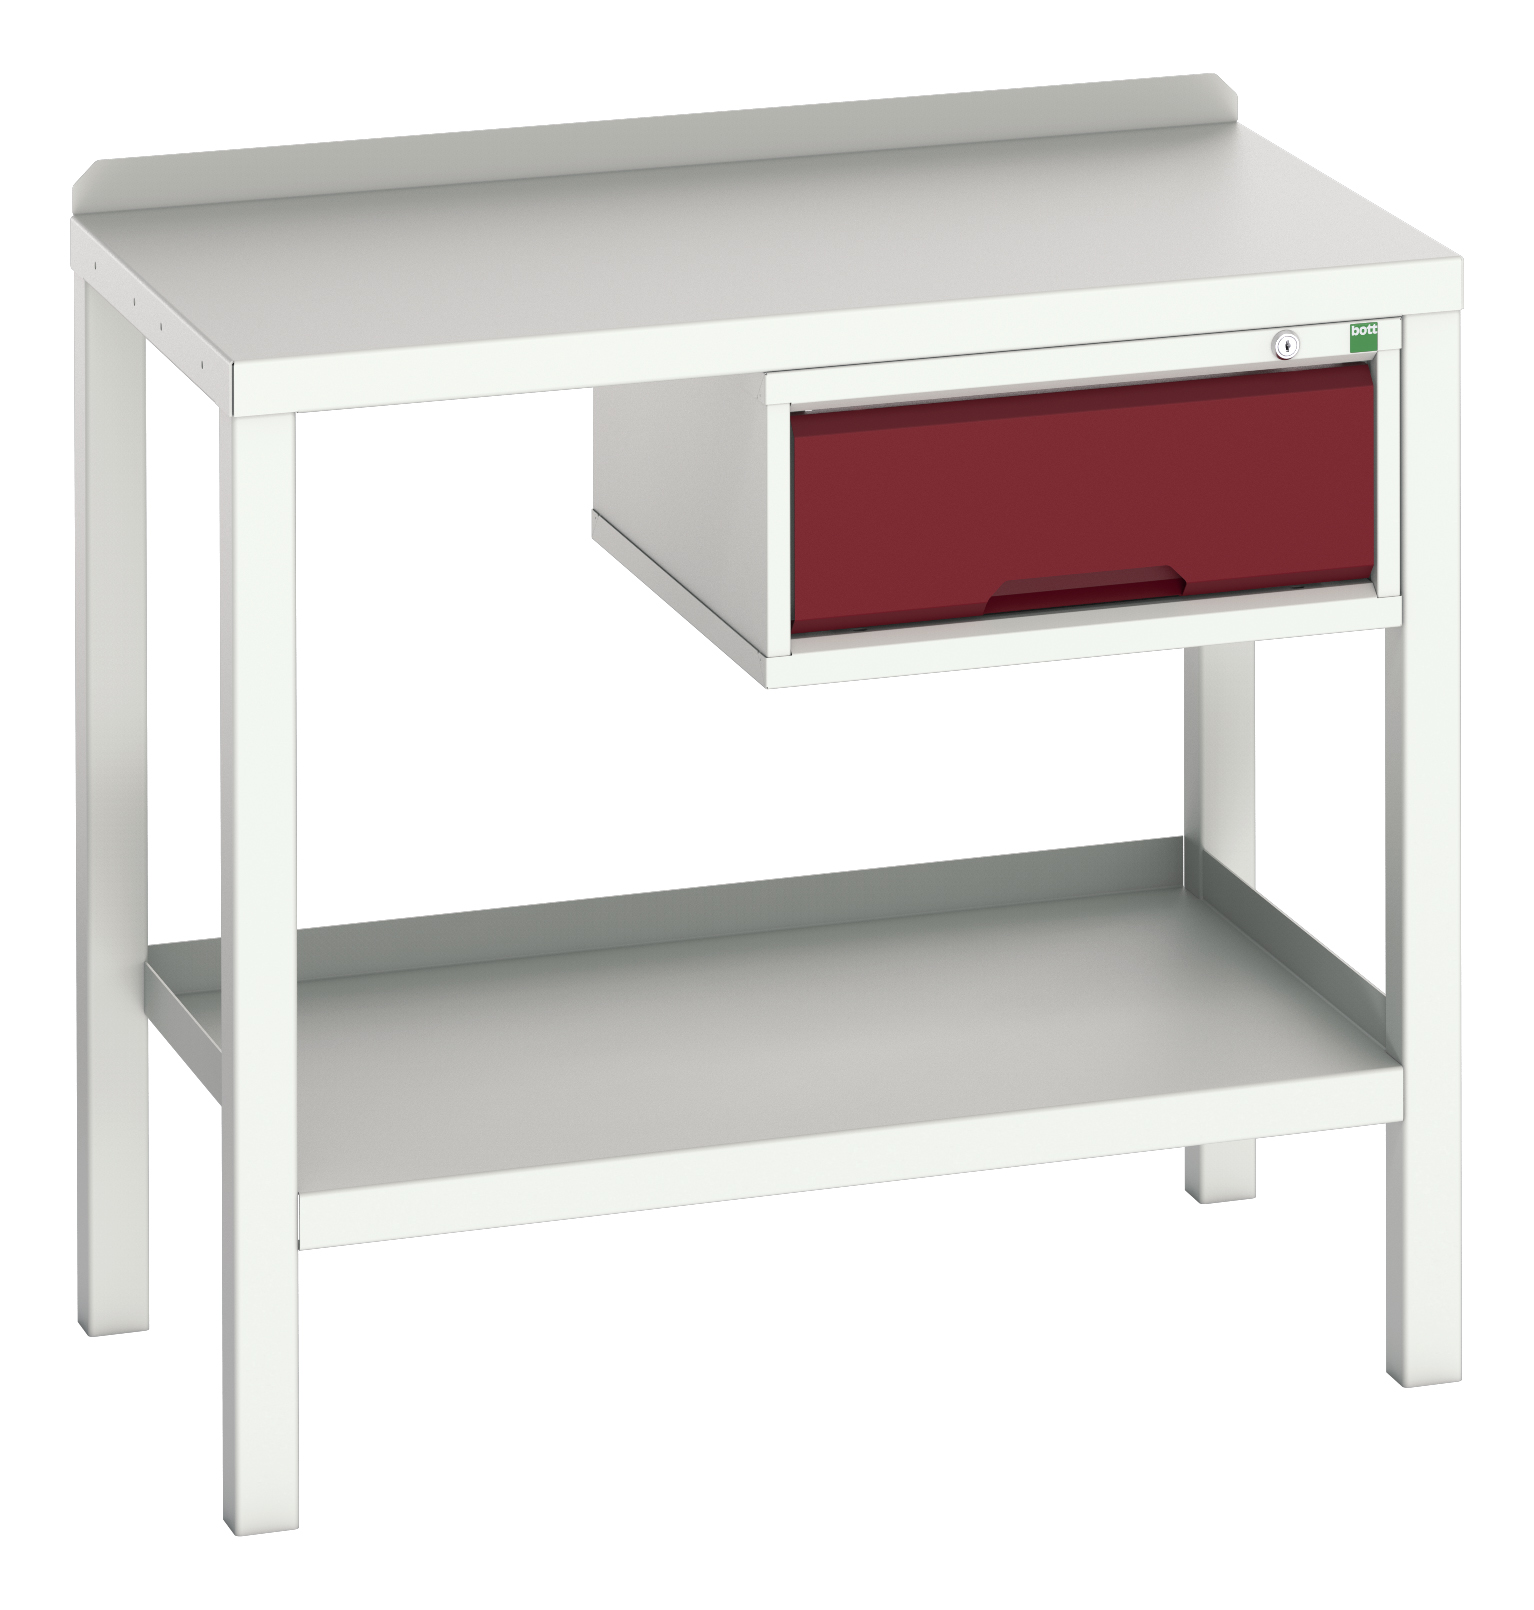 Bott Verso Welded Bench With 1 Drawer Cabinet - 16922600.24